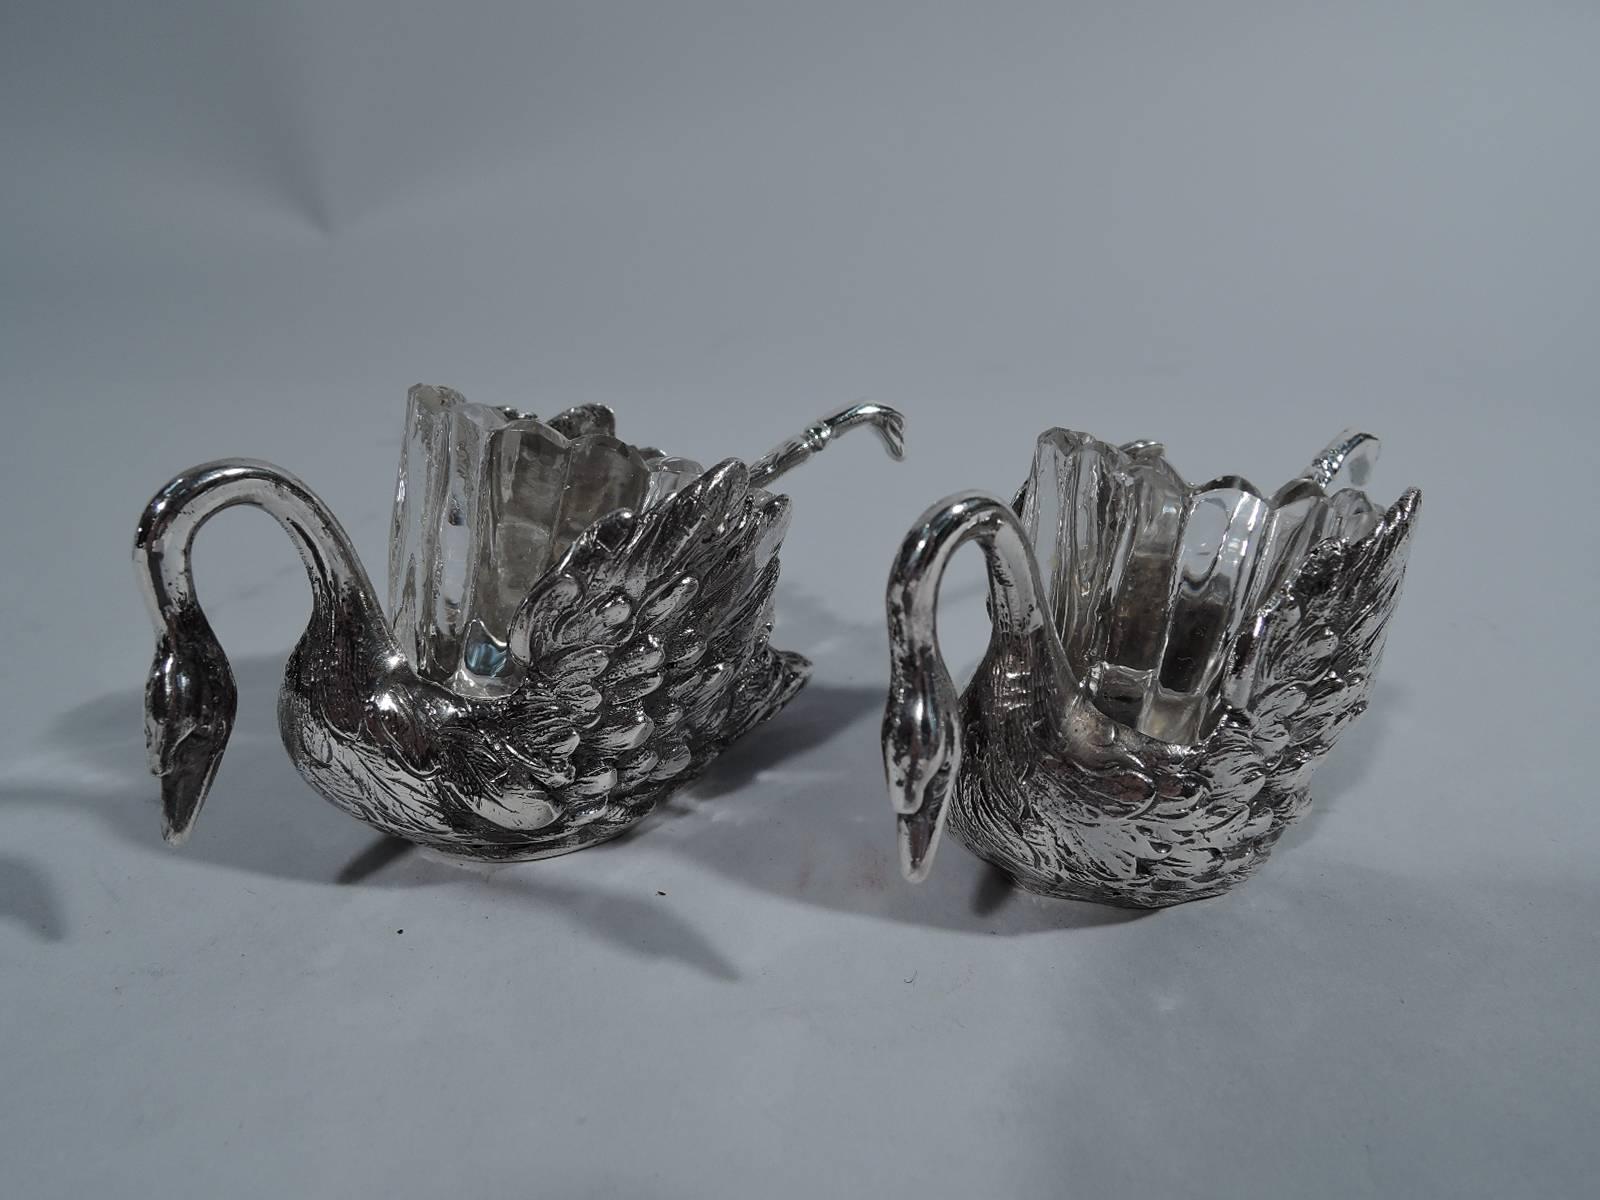 Set of four German 800 silver swan-form open salts with glass liners, circa 1900. Each bird has big downy wings and slender neck terminating in pointed bill. Liner is clear glass with fluting and scalloping. German hallmark. Dimensions: H 1 3/4 x W